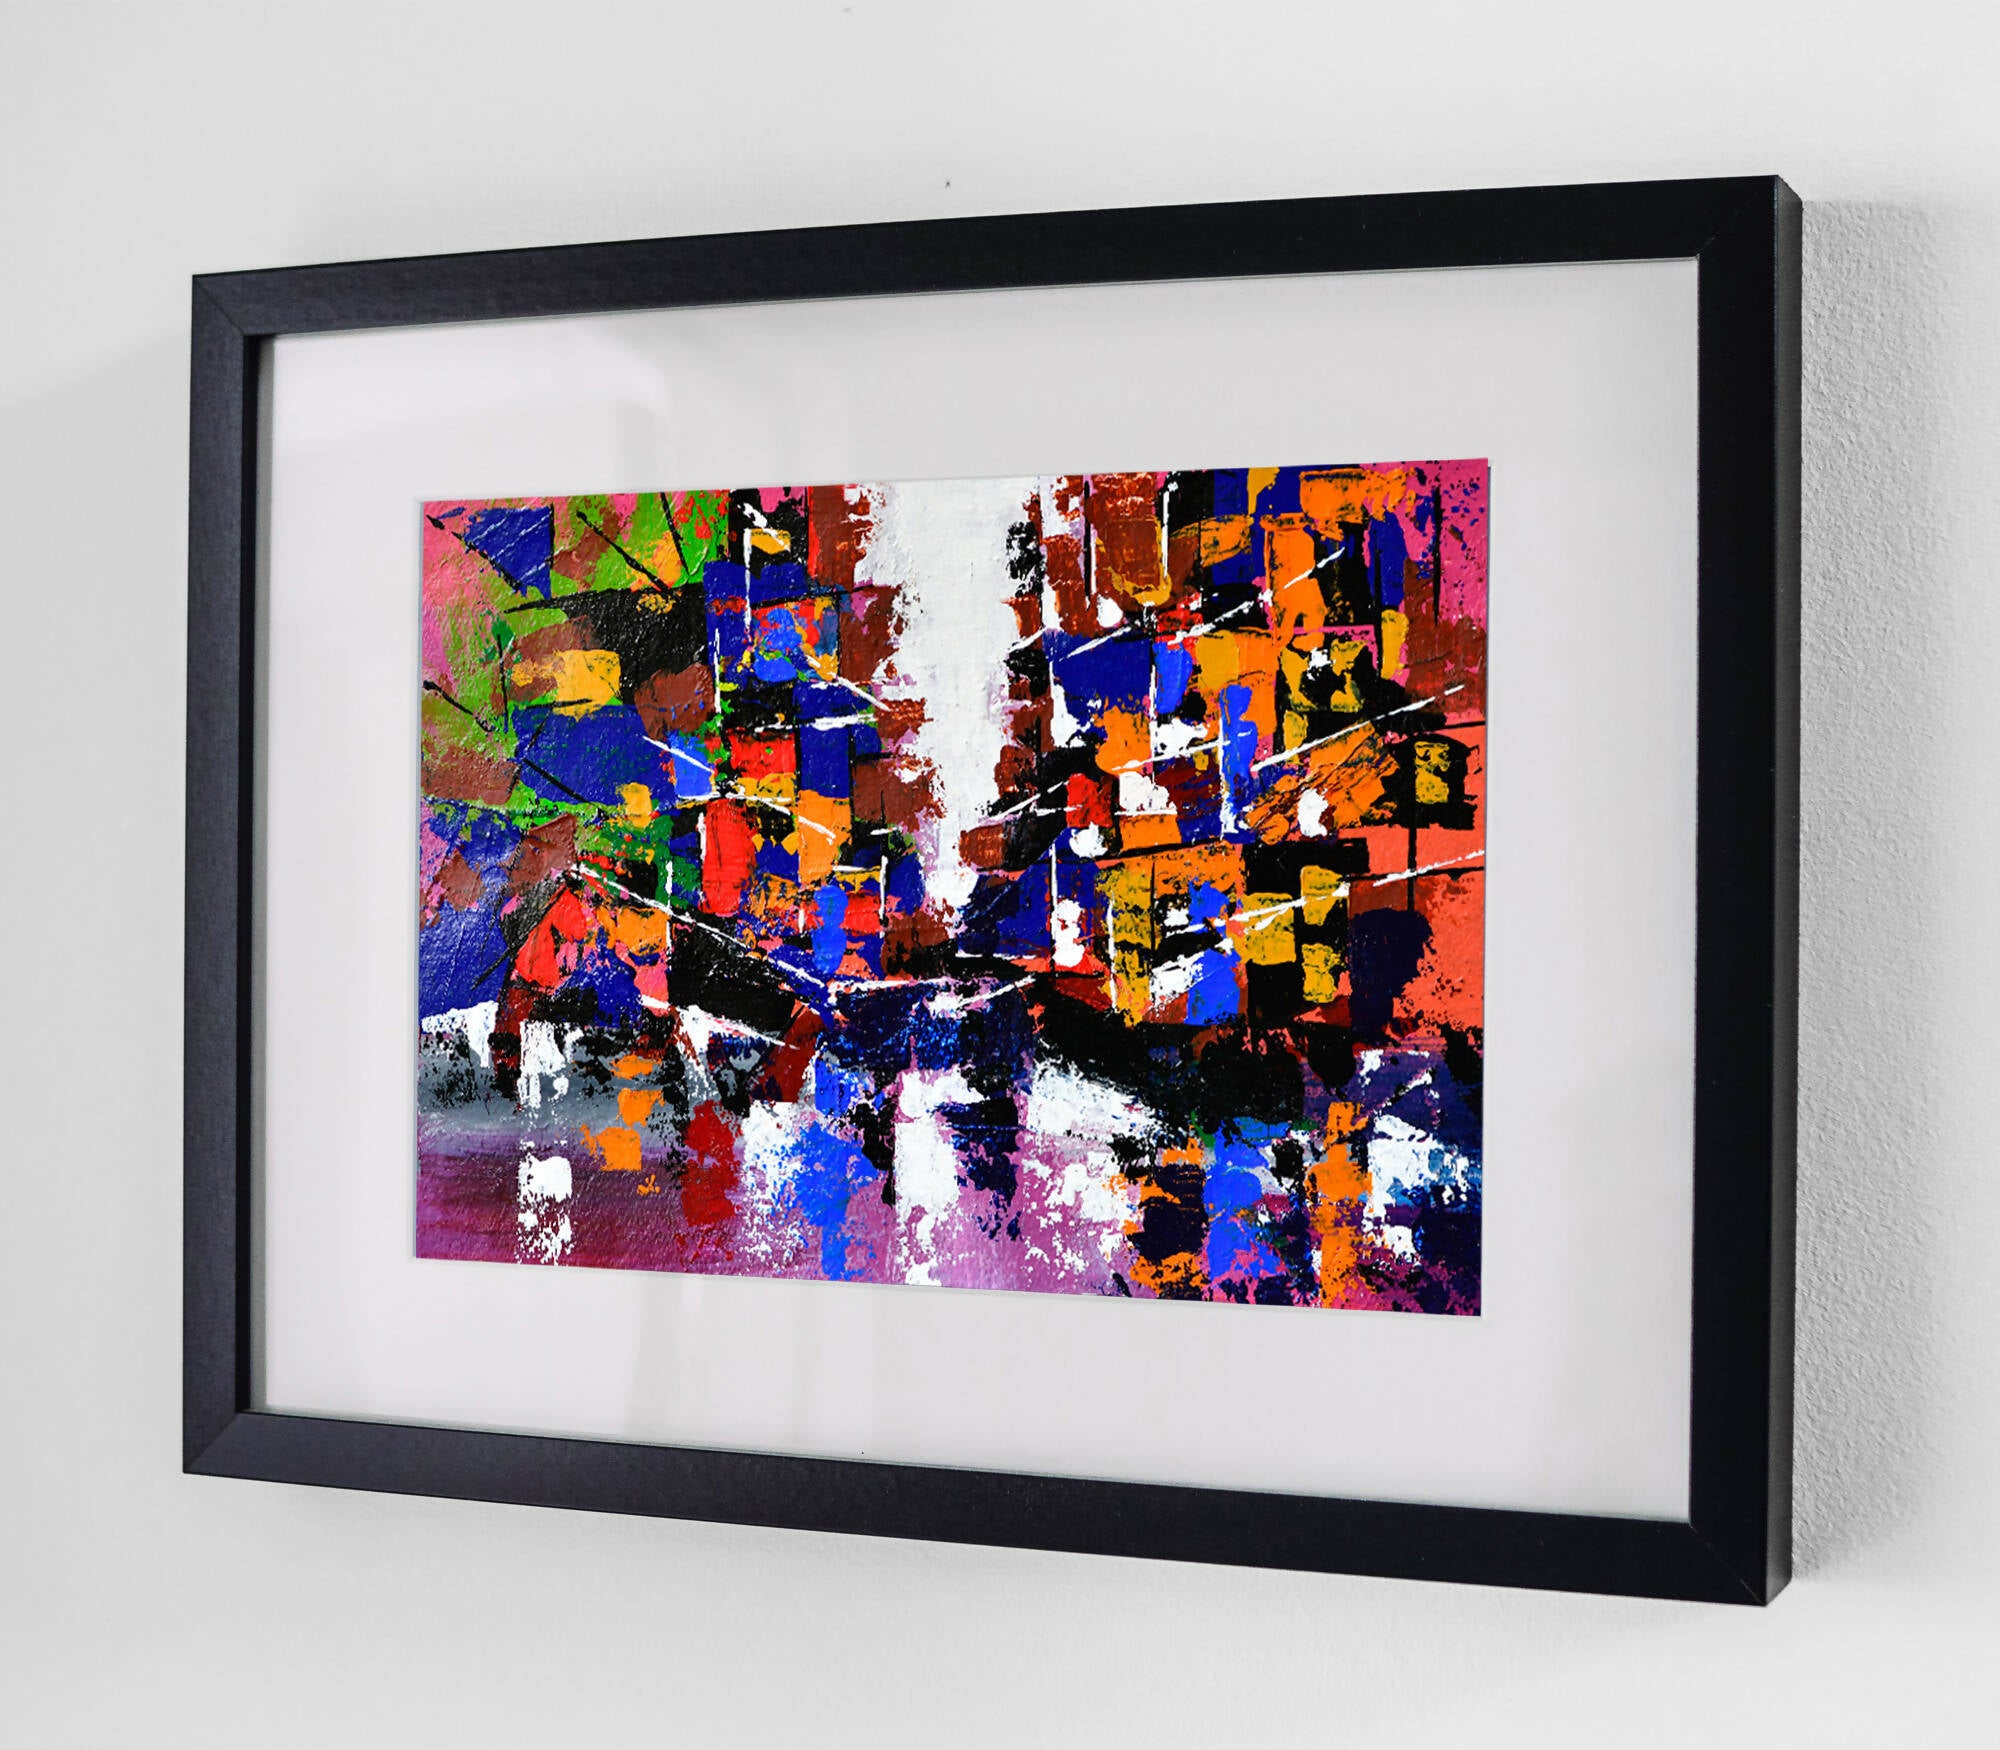 "The City", Acrylic Abstract, wall art, Home and Office decor. ABS - 01